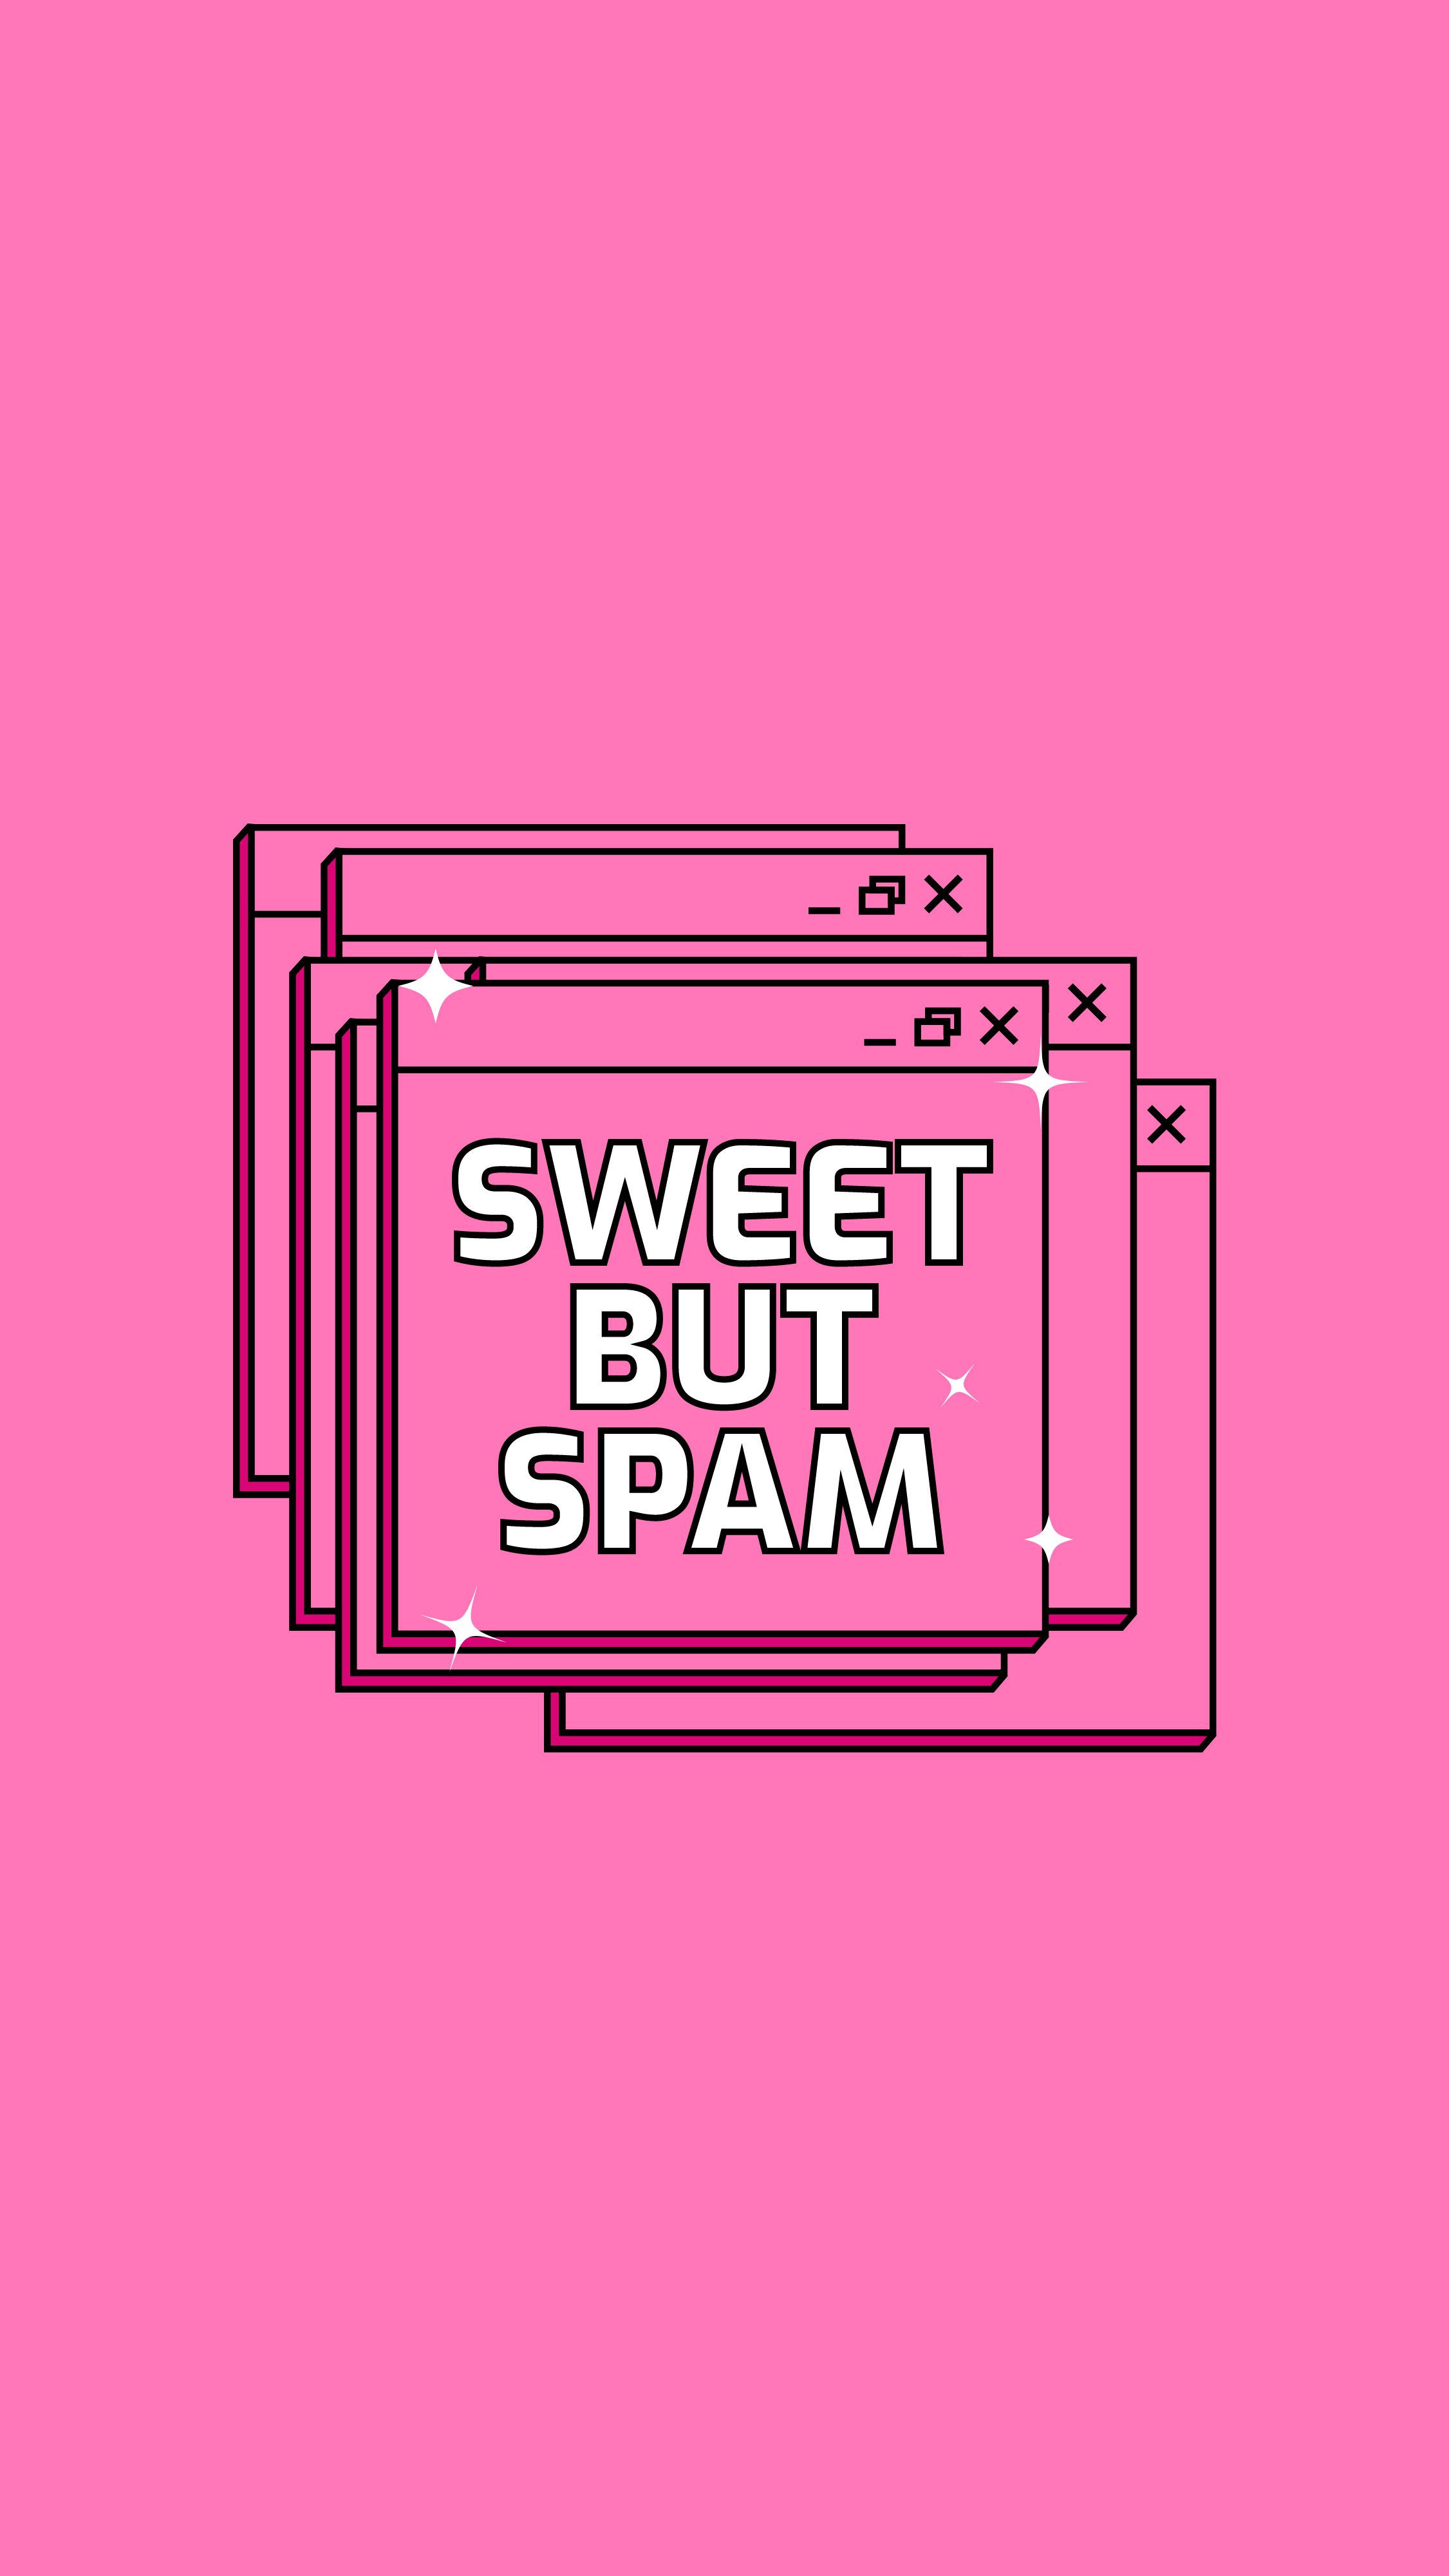 Sweet but Spam Phone Walpaper, Quotes Wallpaper, Adultees.in. Wallpaper quotes, Free phone wallpaper, Wal paper